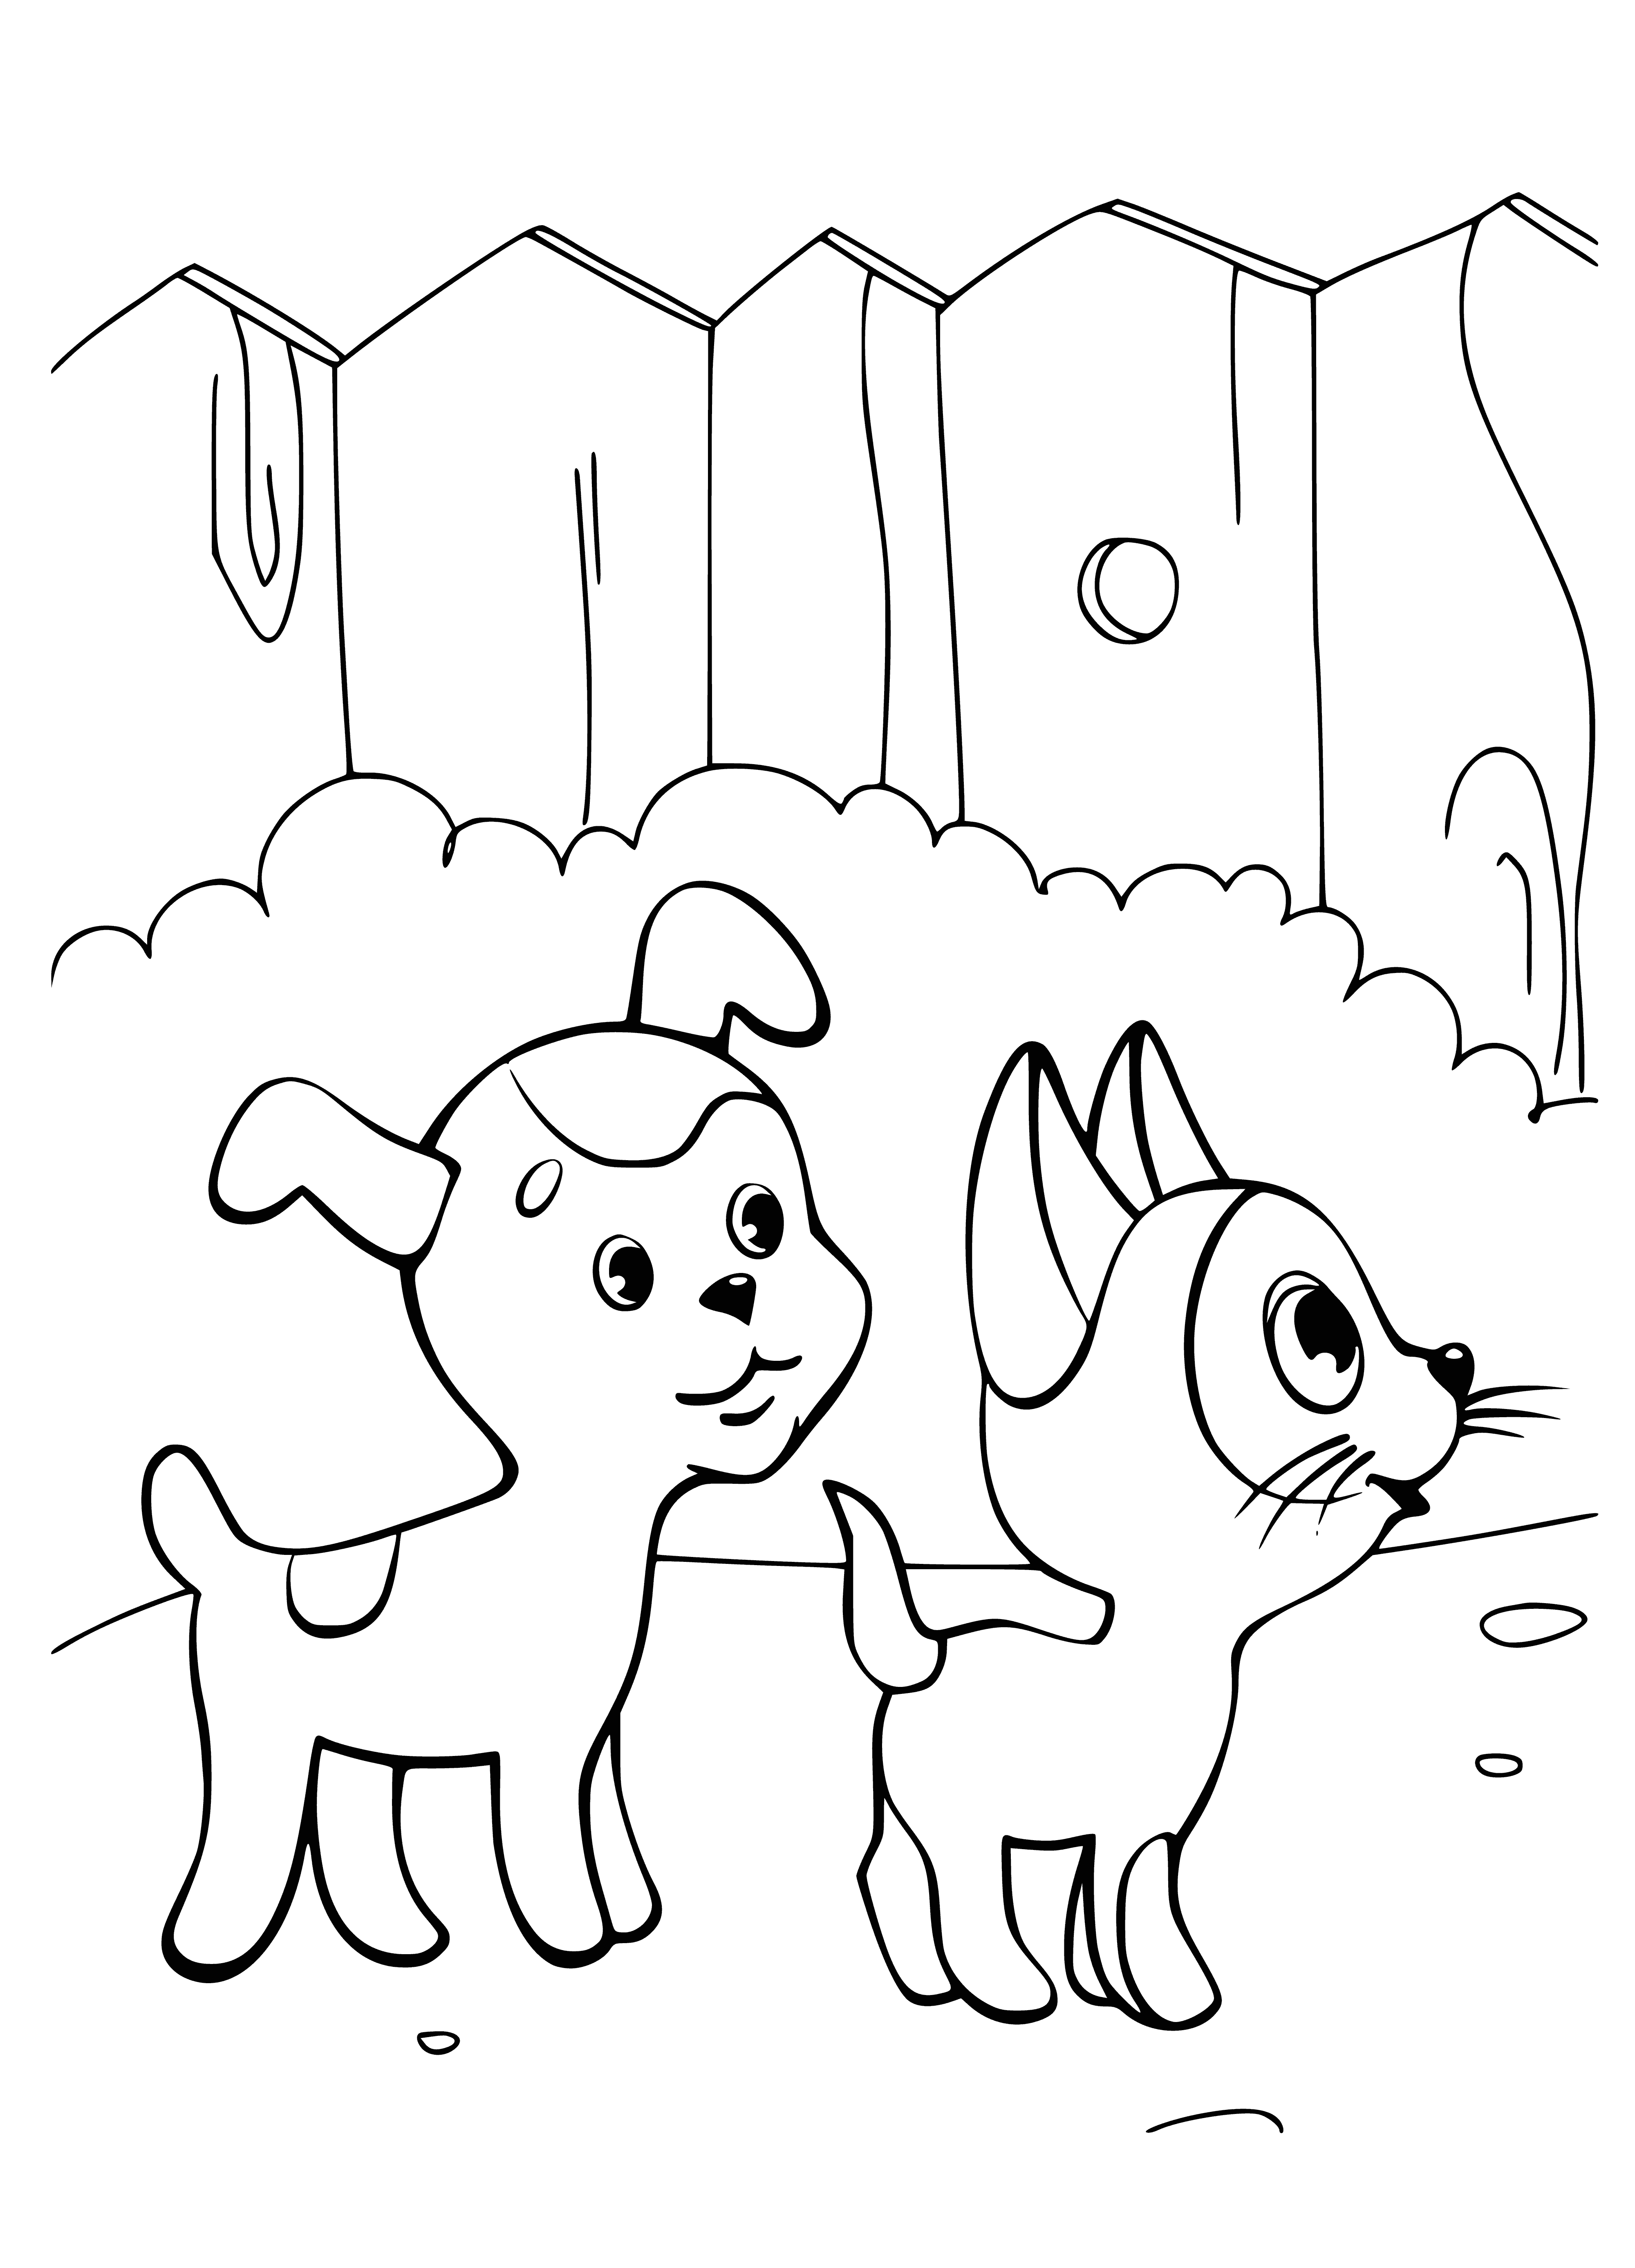 coloring page: Small brown kitten & white puppy happily content on a green chair.